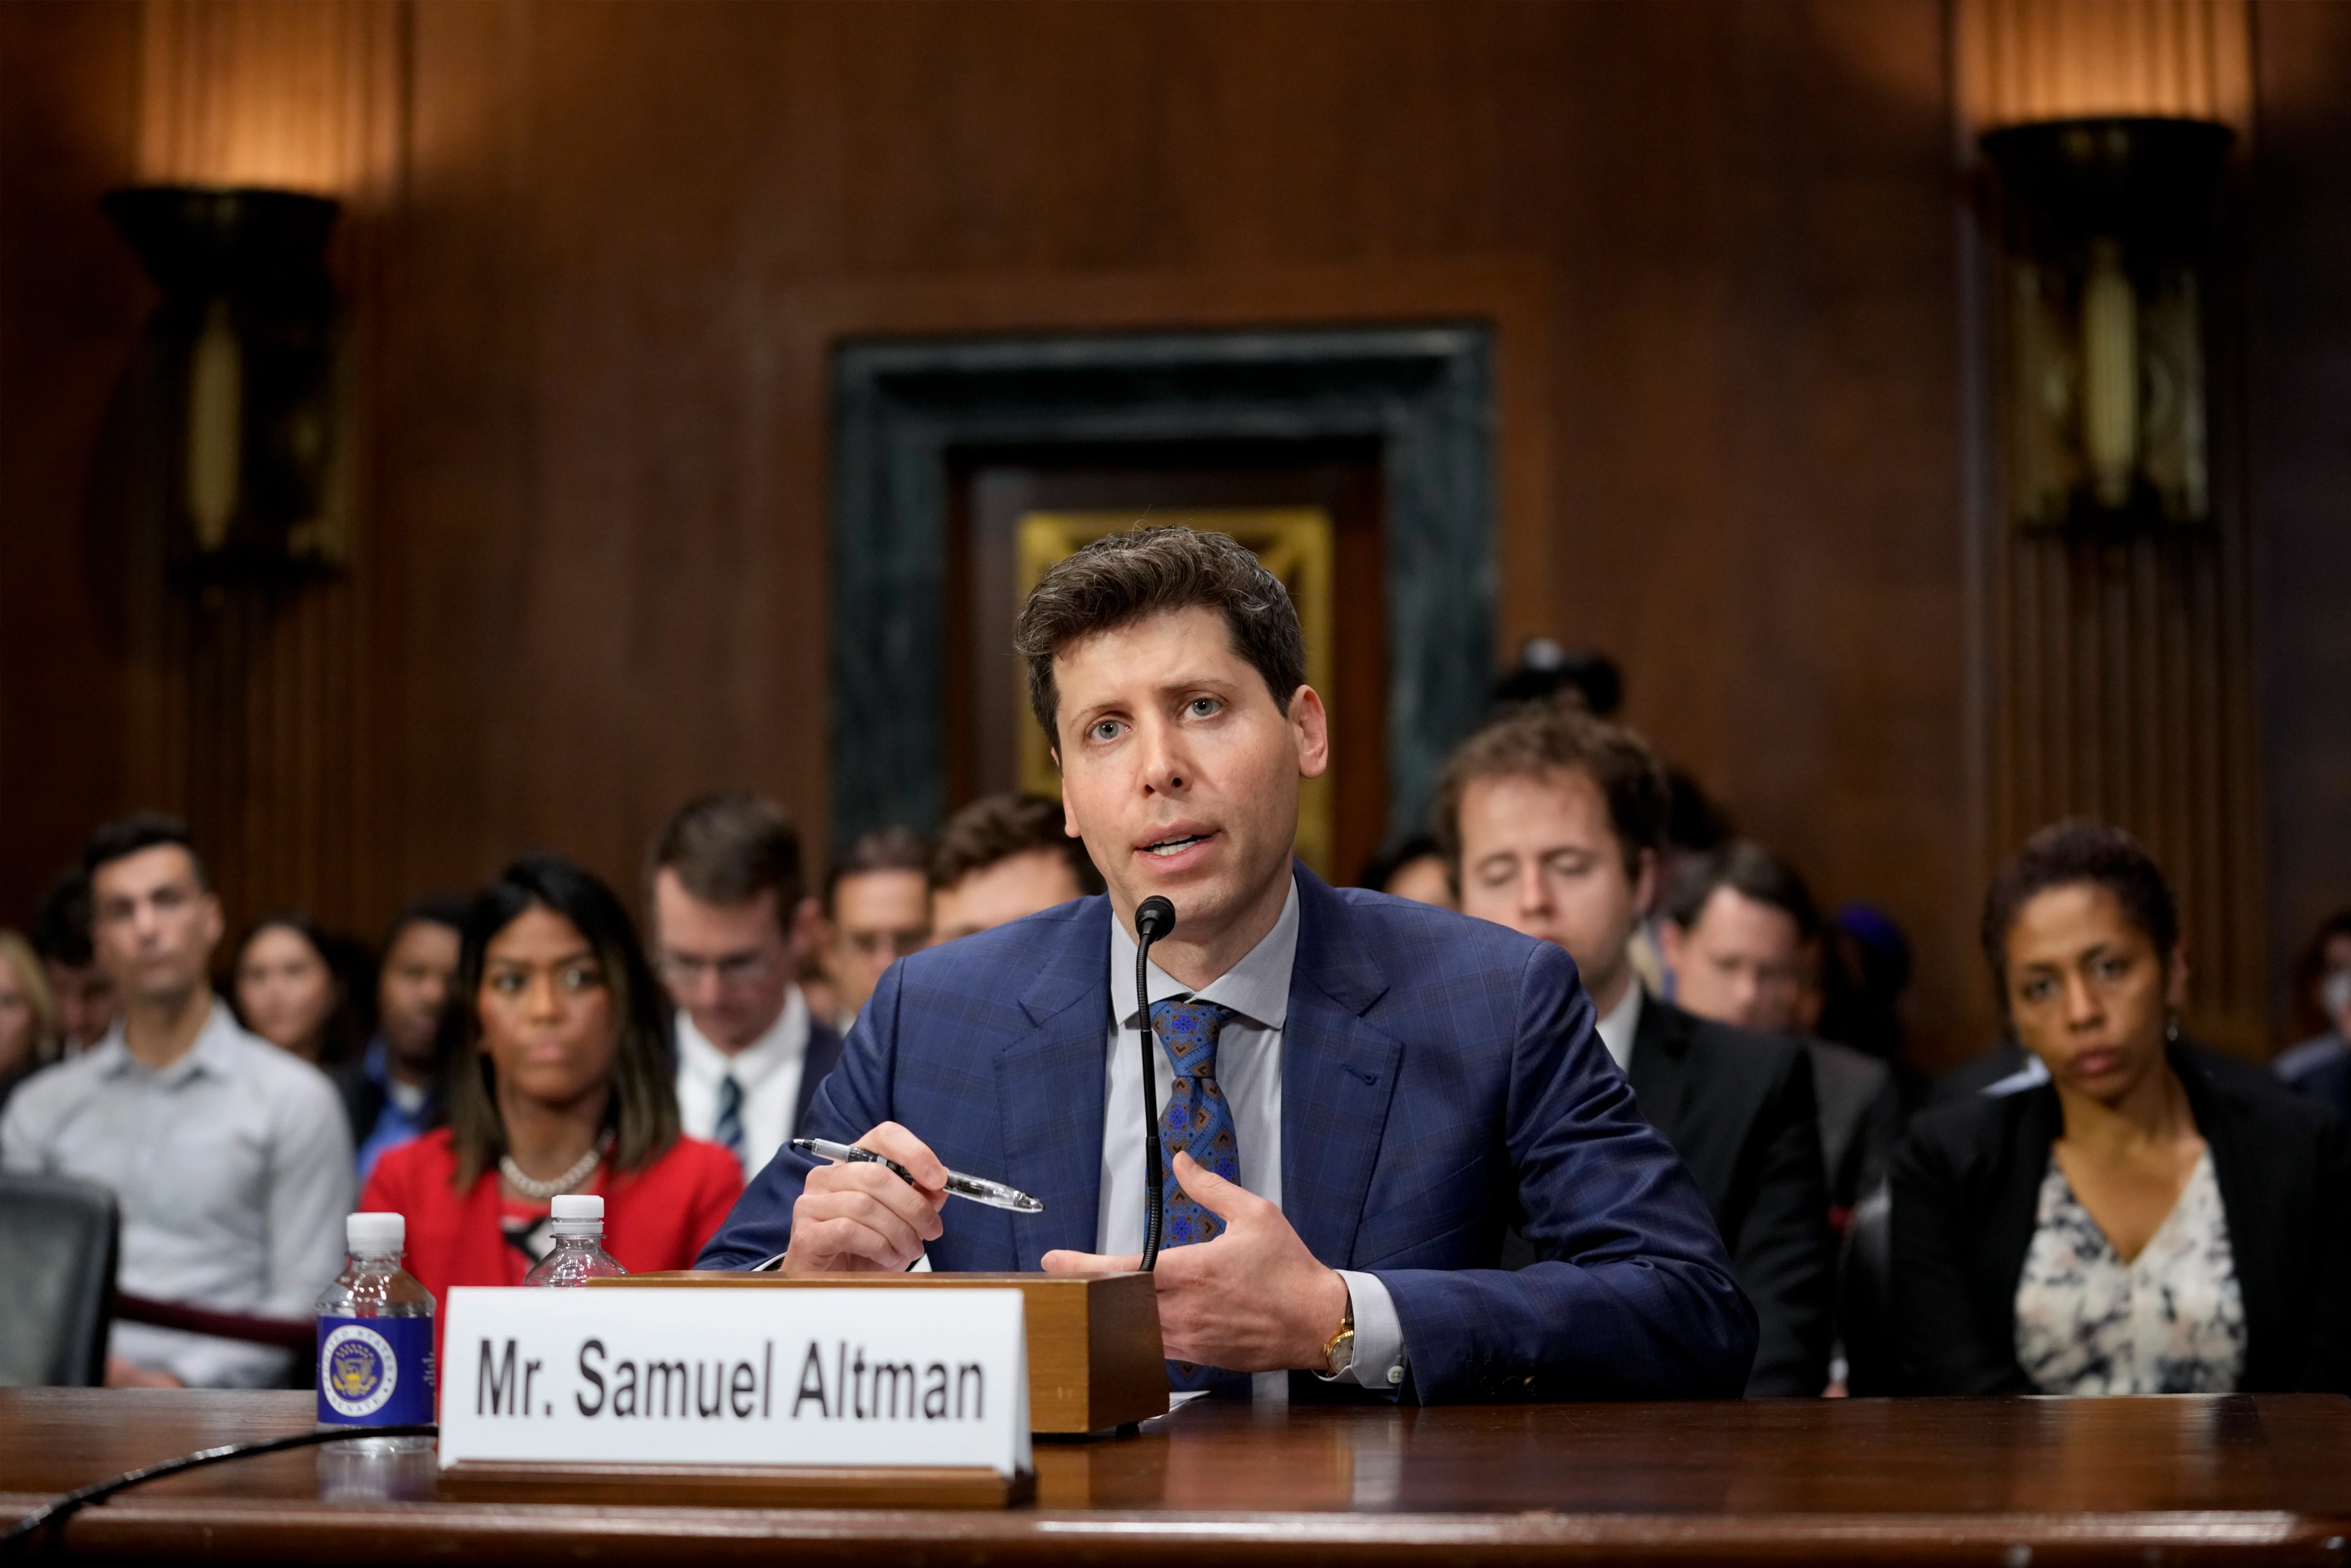 A man in a suit speaks at a hearing, people behind him, &quot;Mr. Samuel Altman&quot; sign in front. 